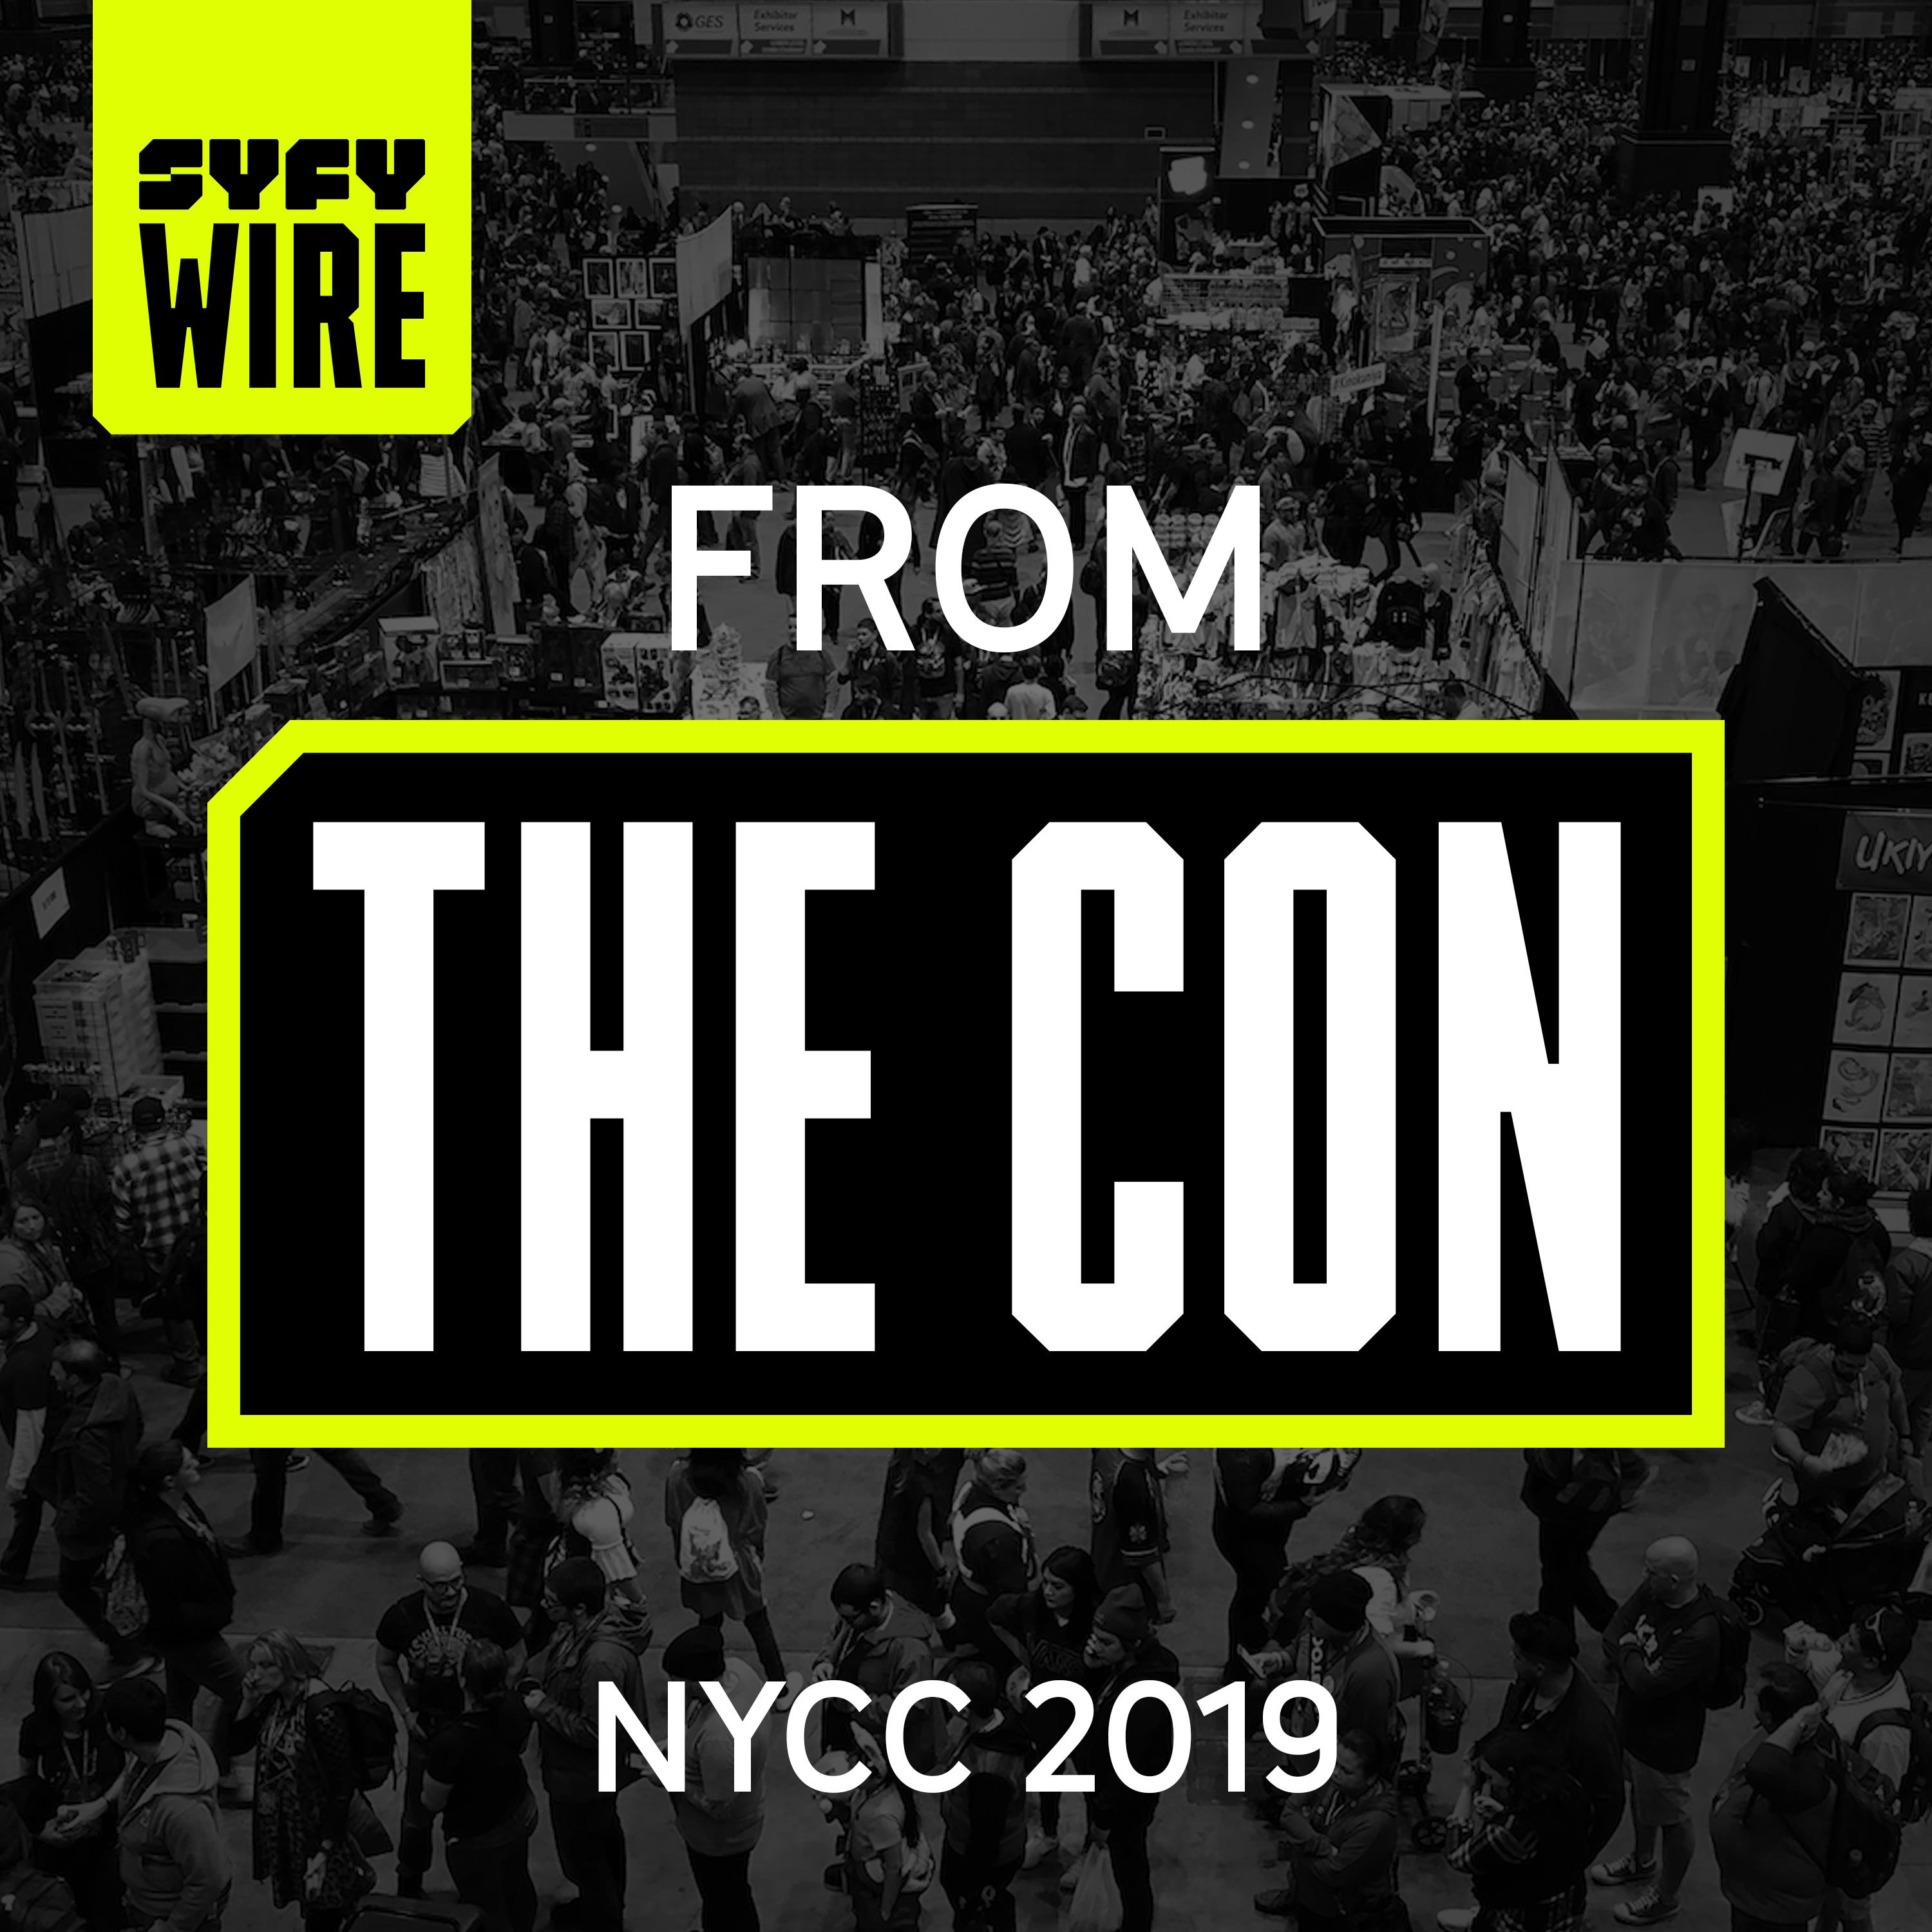 New York Comic Con 2019 - Coming October 3rd